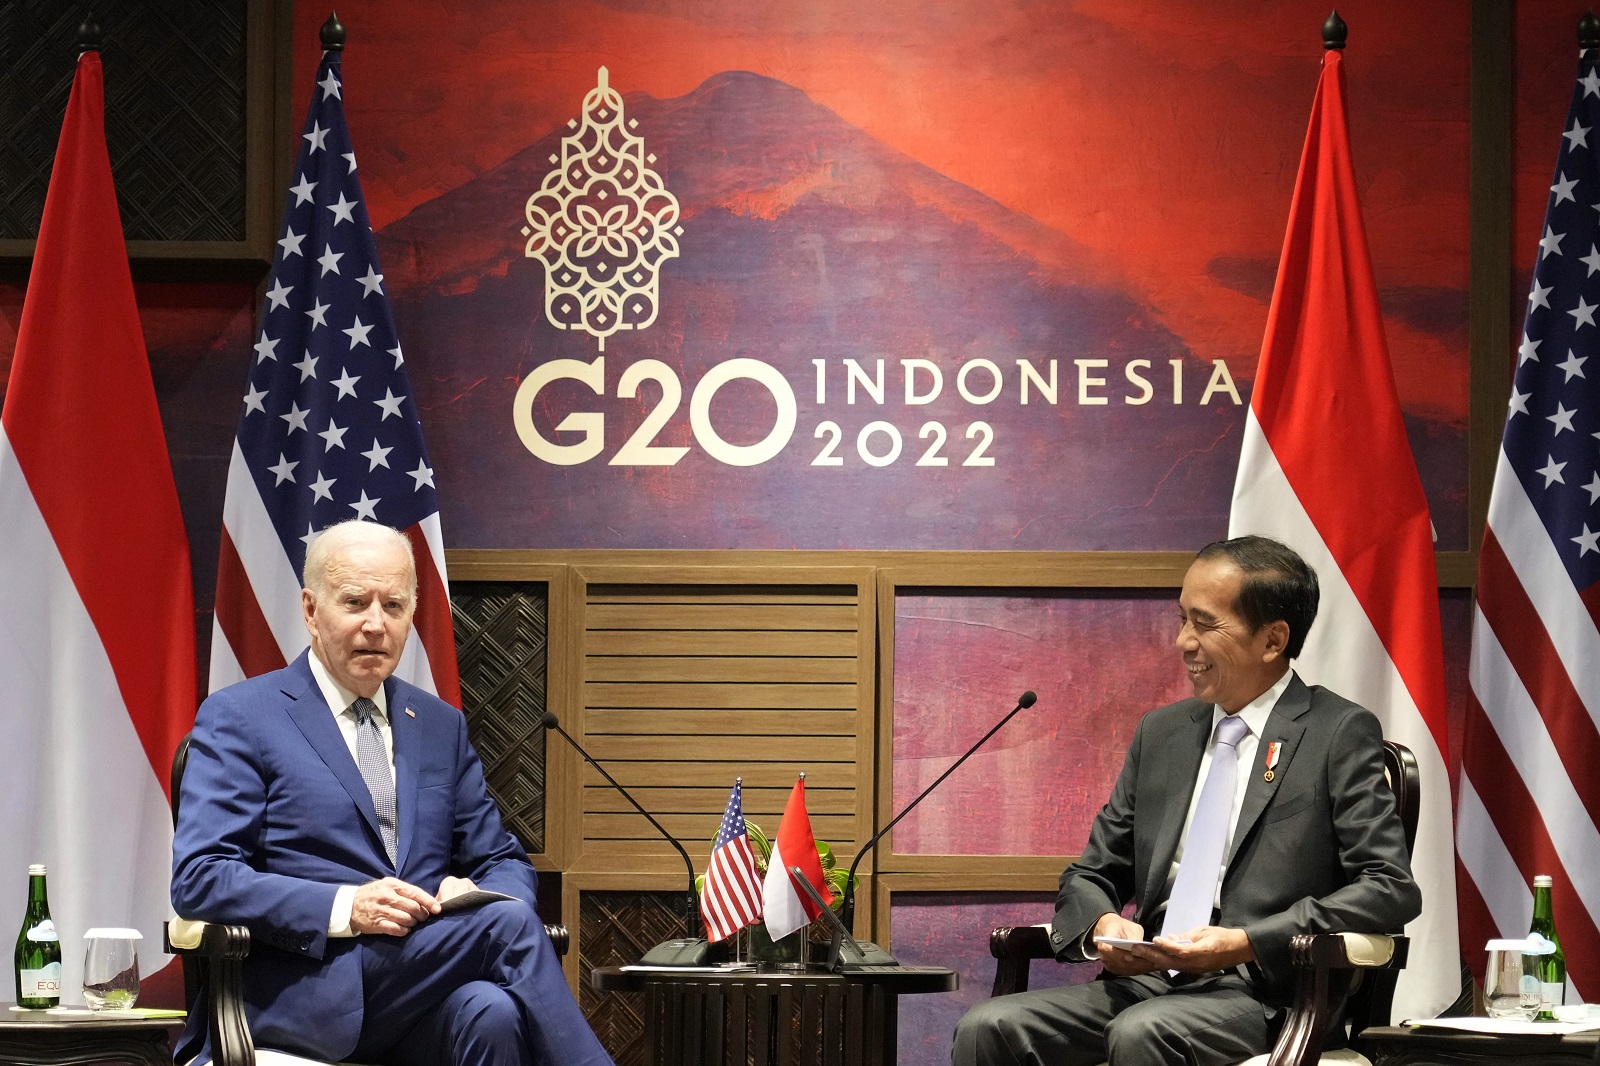 epa10304873 US President Joe Biden (L) talks with Indonesian President Joko Widodo during their bilateral meeting ahead of the G20 Summit in Nusa Dua, Bali, Indonesia, 14 November 2022. The 17th Group of Twenty (G20) Heads of State and Government Summit will be held in Bali from 15 to 16 November 2022.  EPA/ACHMAD IBRAHIM / POOL